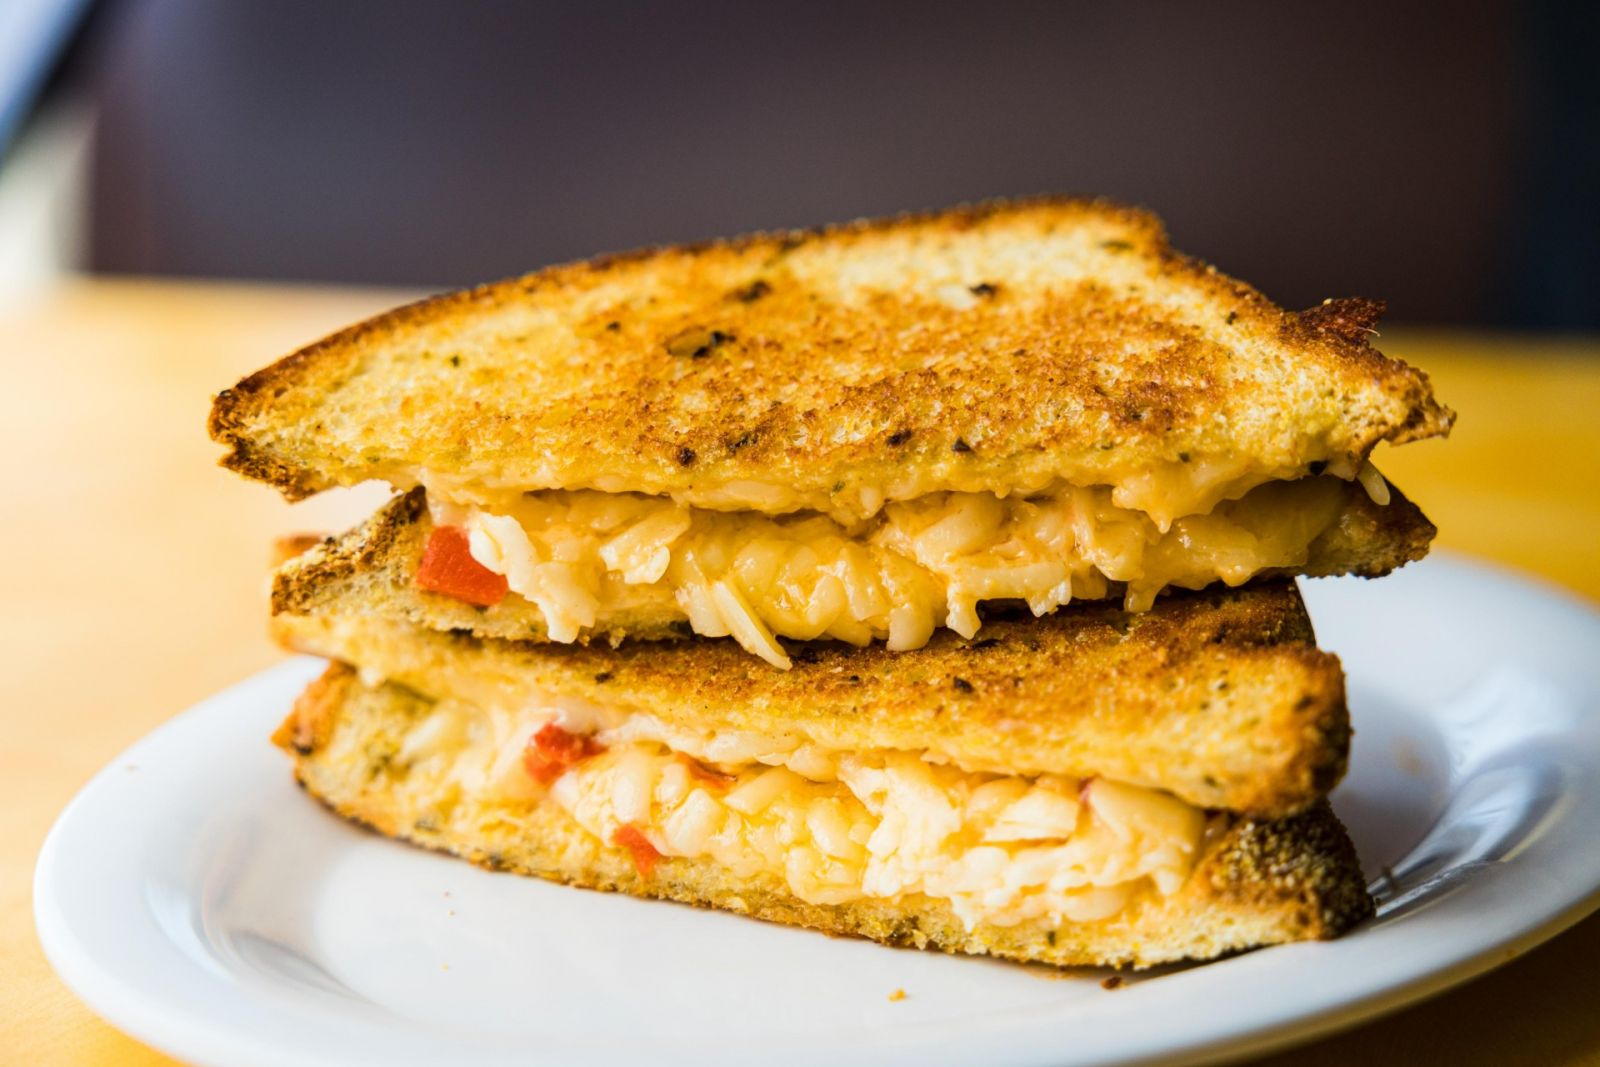 Experience Columbia SC is celebrating National Cheese Day on June 4 by reintroducing its Pimento Cheese Passport. The downloadable passport features 17 dishes highlighting the ingredient at 17 participating restaurants. (Photo/Forrest Clonts)